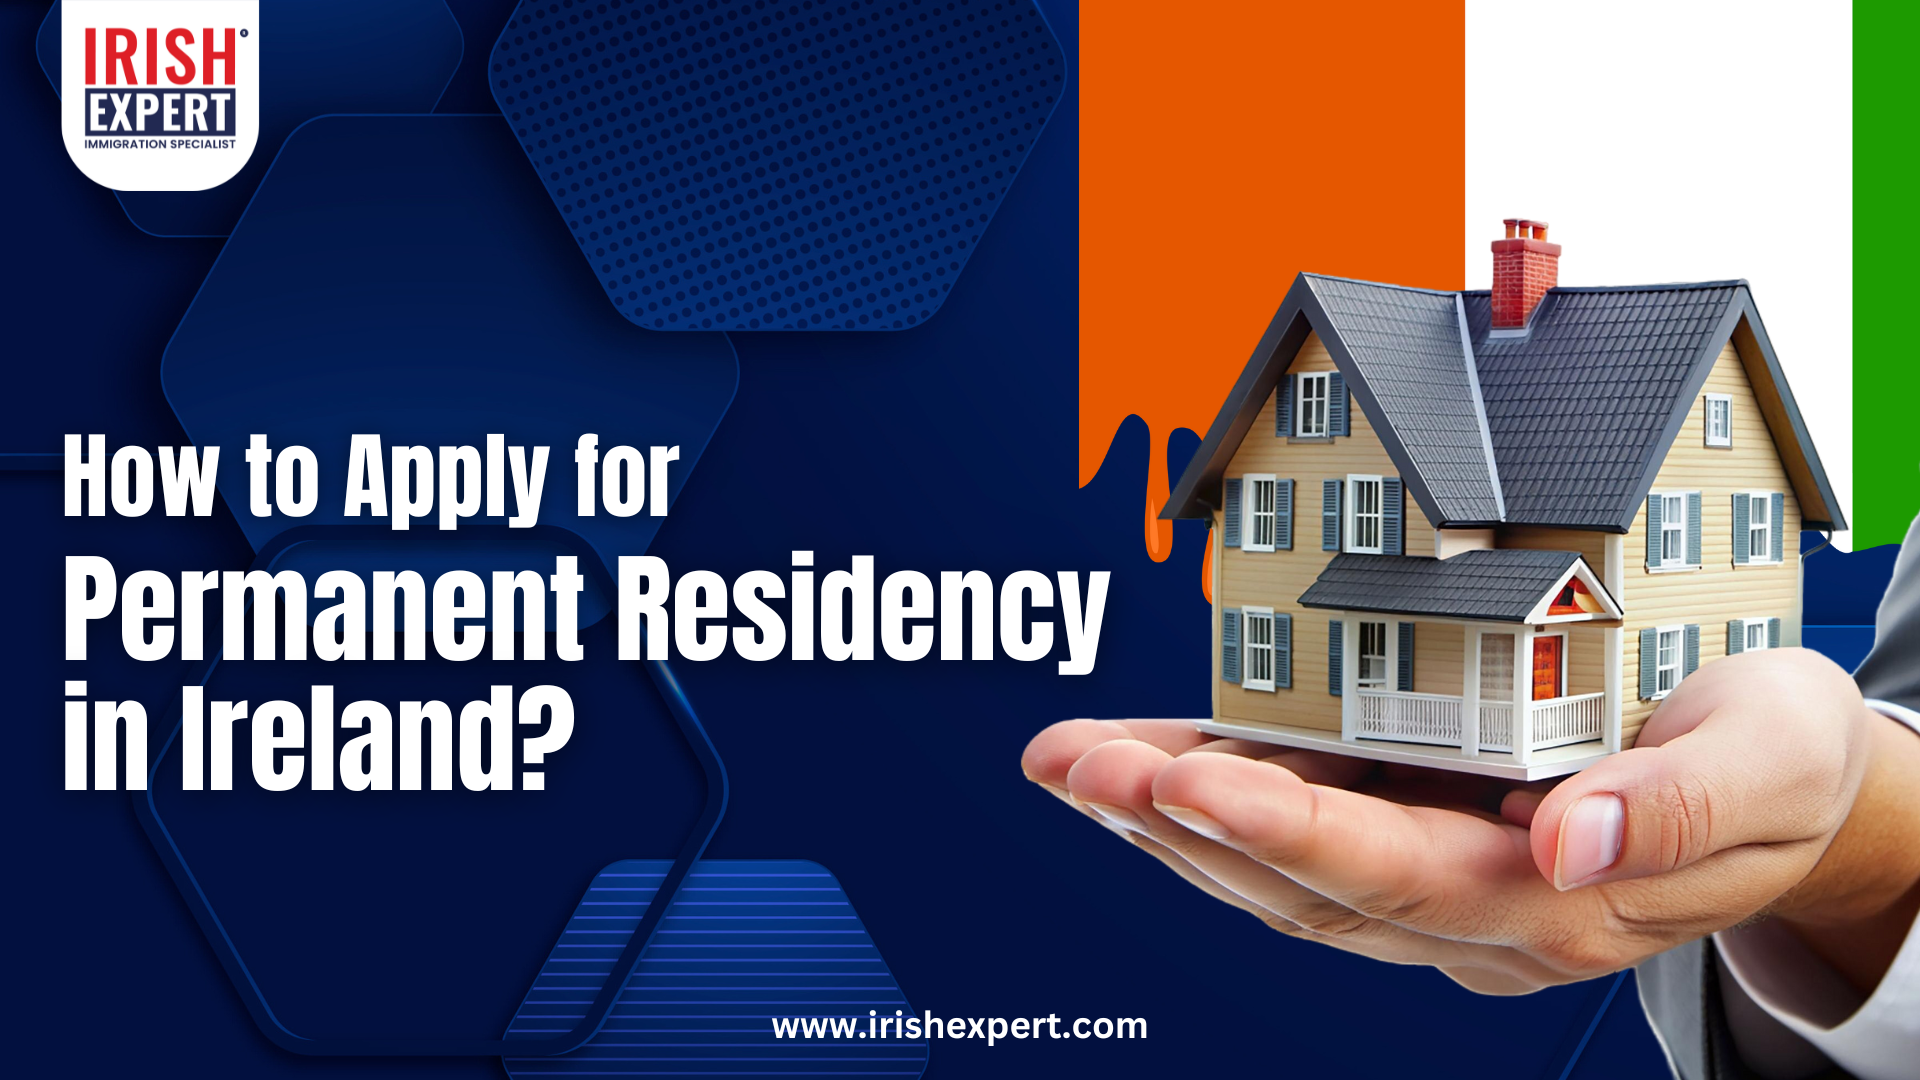 How to Apply for Permanent Residency in Ireland?